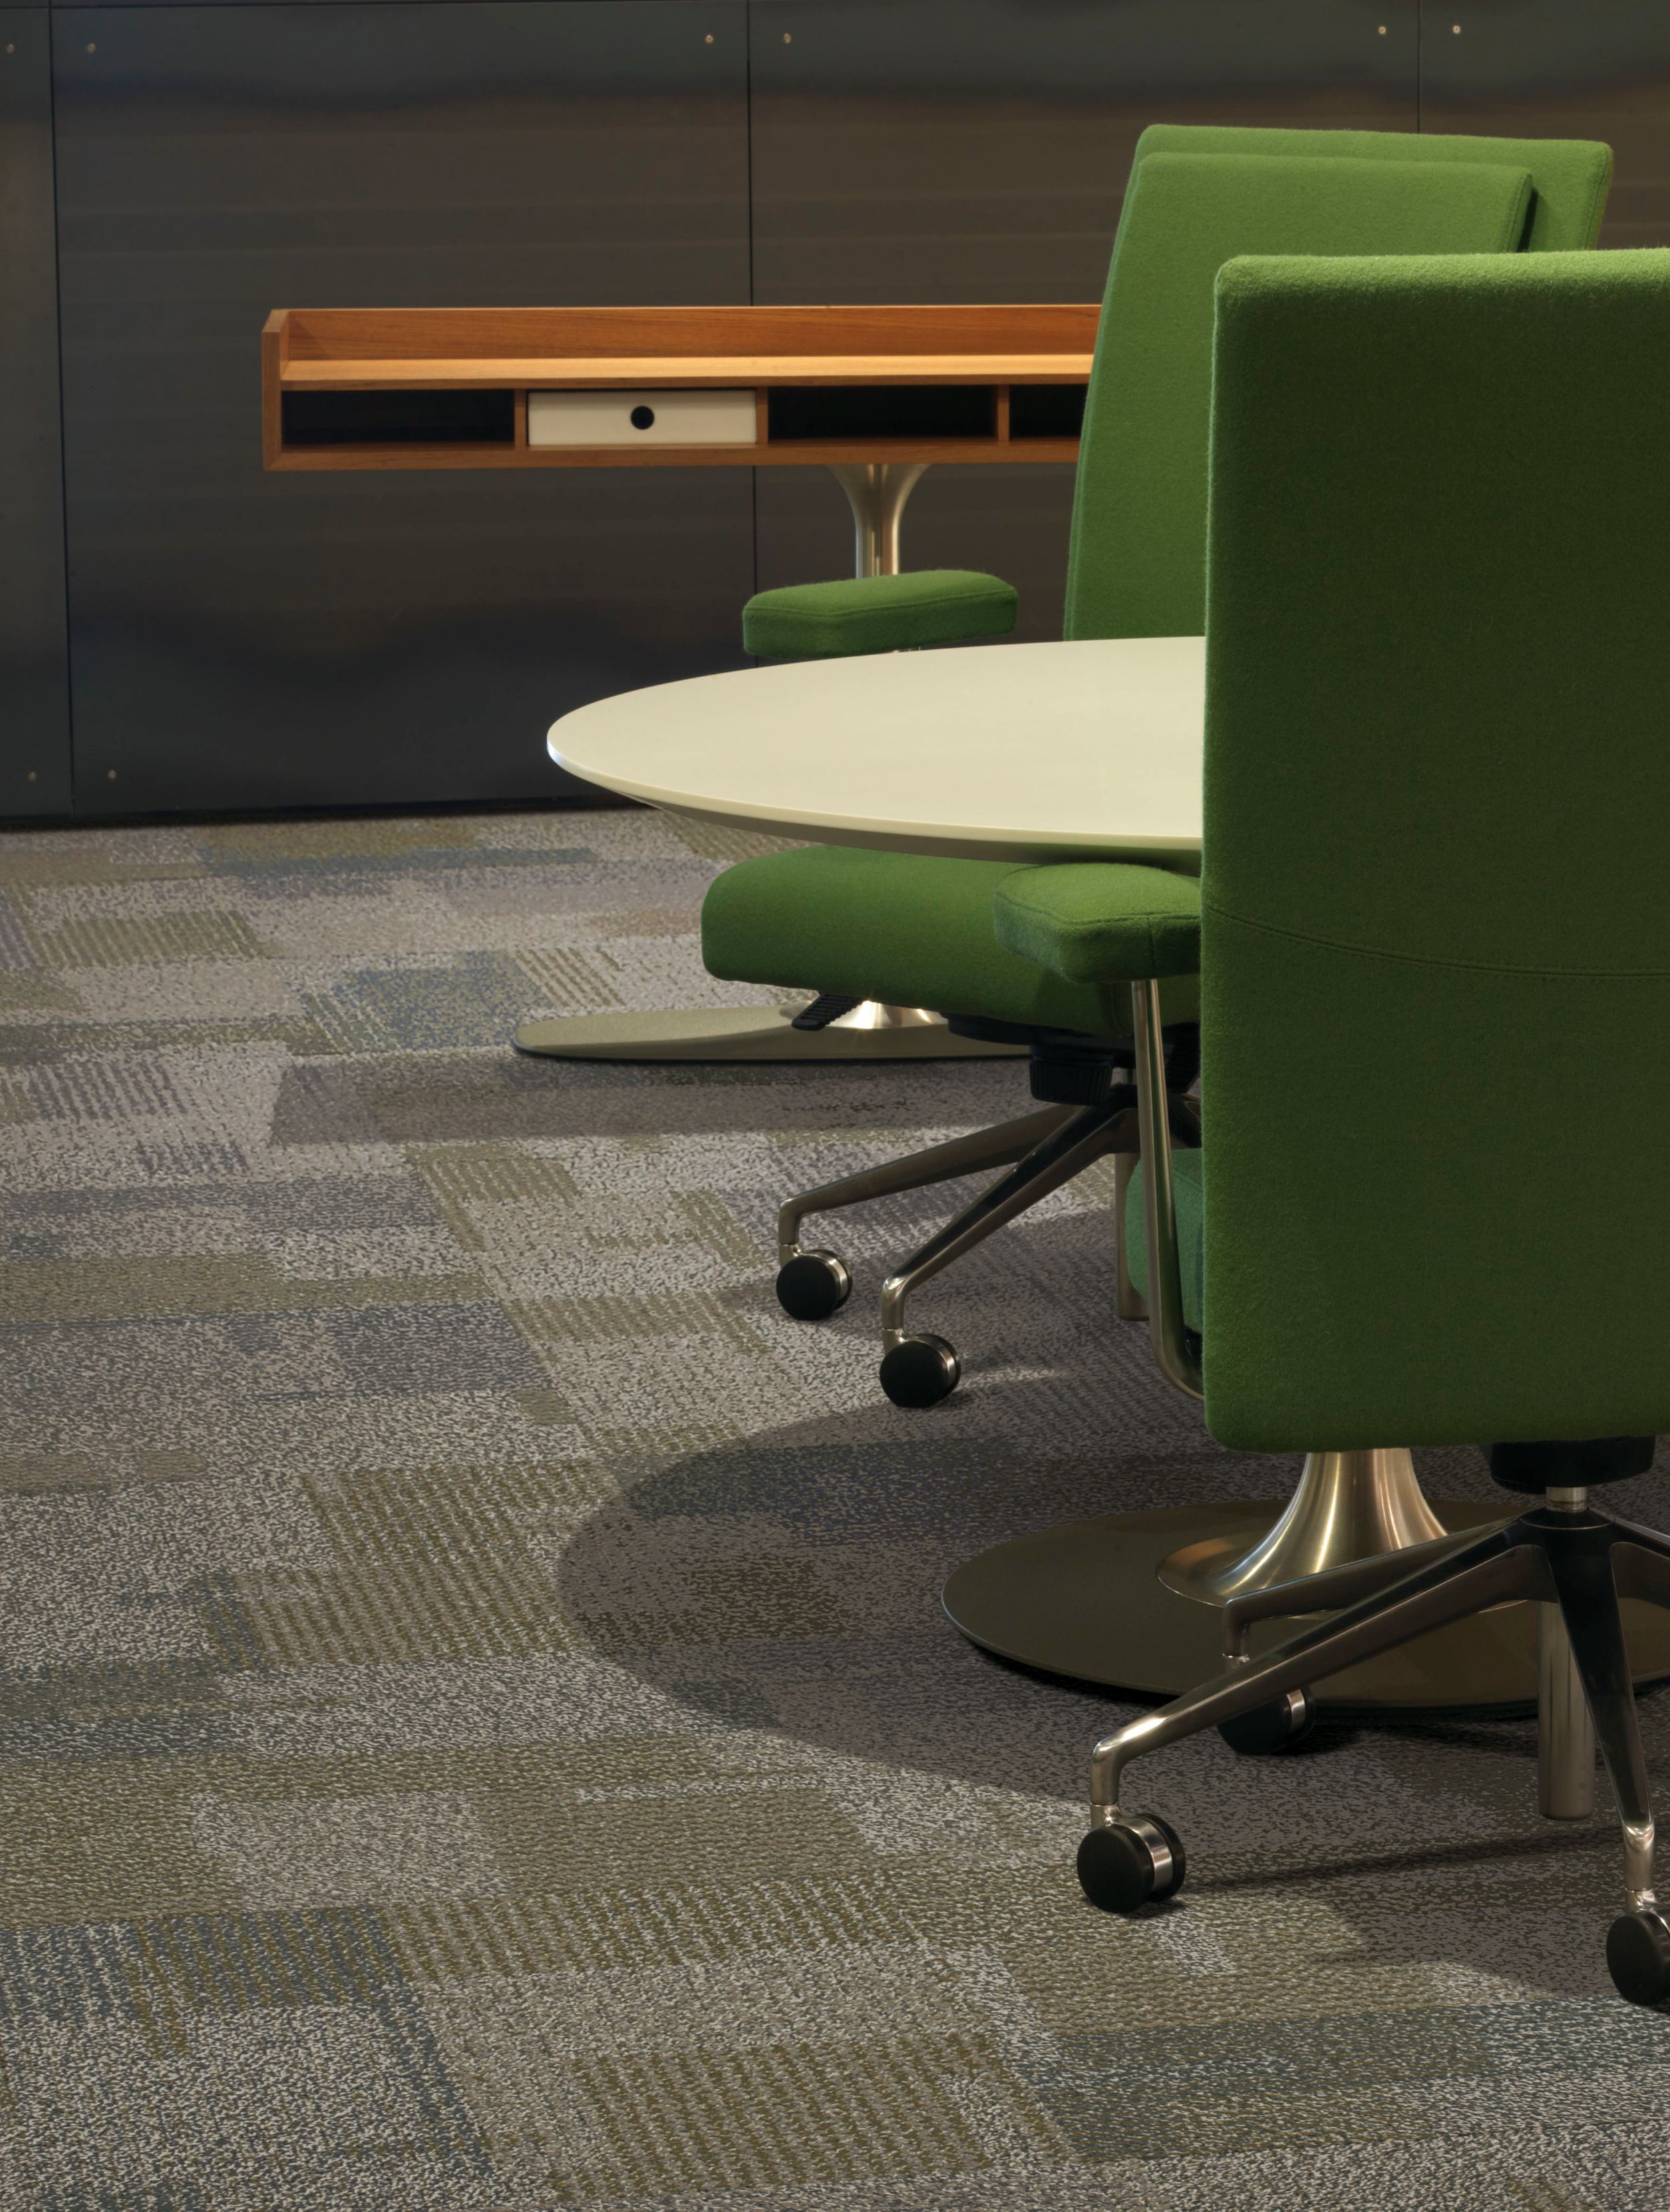 Interface Entropy carpet tile in room with green chairs and wooden shelf in background imagen número 6